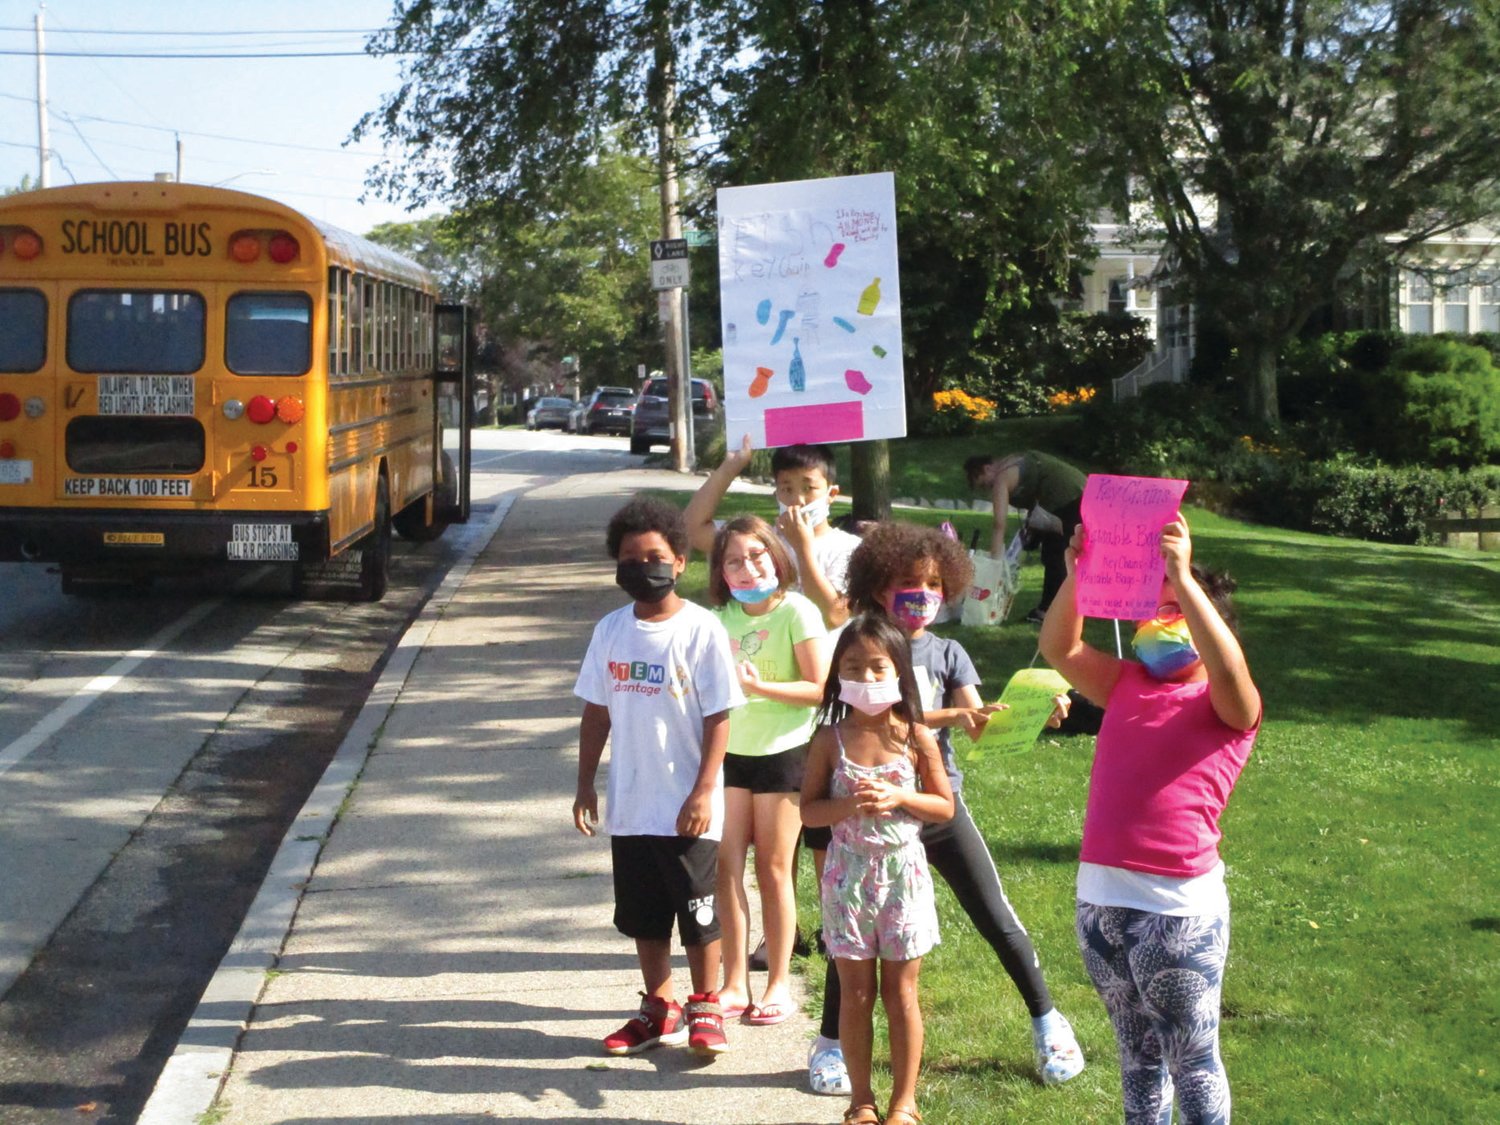 SHOW OF EXCITEMENT: Young participants in the STEM Advantage program wave to passers-by during their gathering at Stillhouse Cove last week.